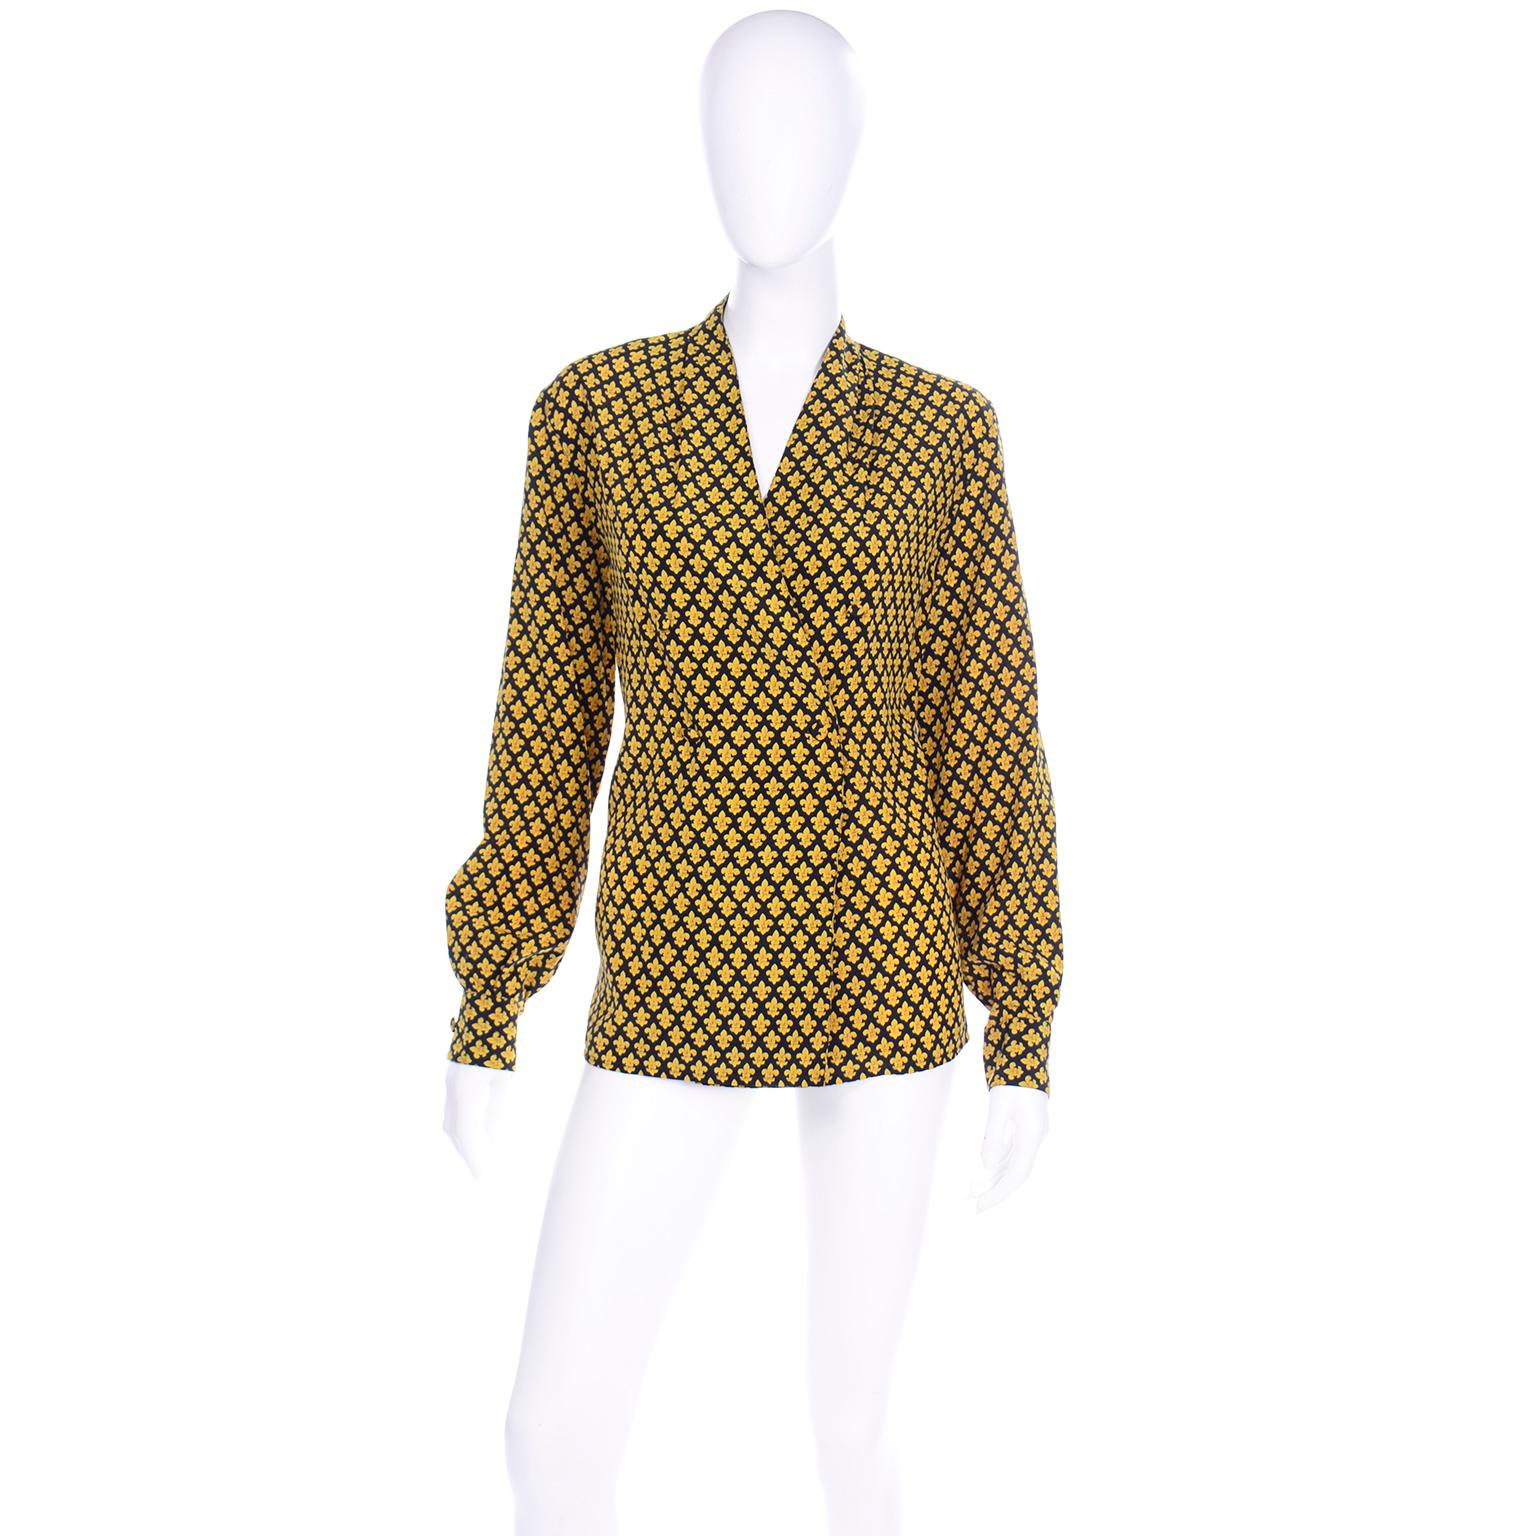 This vintage Salvatore Ferragamo long sleeve silk blouse is in a lovely fleur de lis black and gold print. This double breasted blouse is collarless and has a pleated detail near the collar that makes this drape so effortlessly. The fabric covered